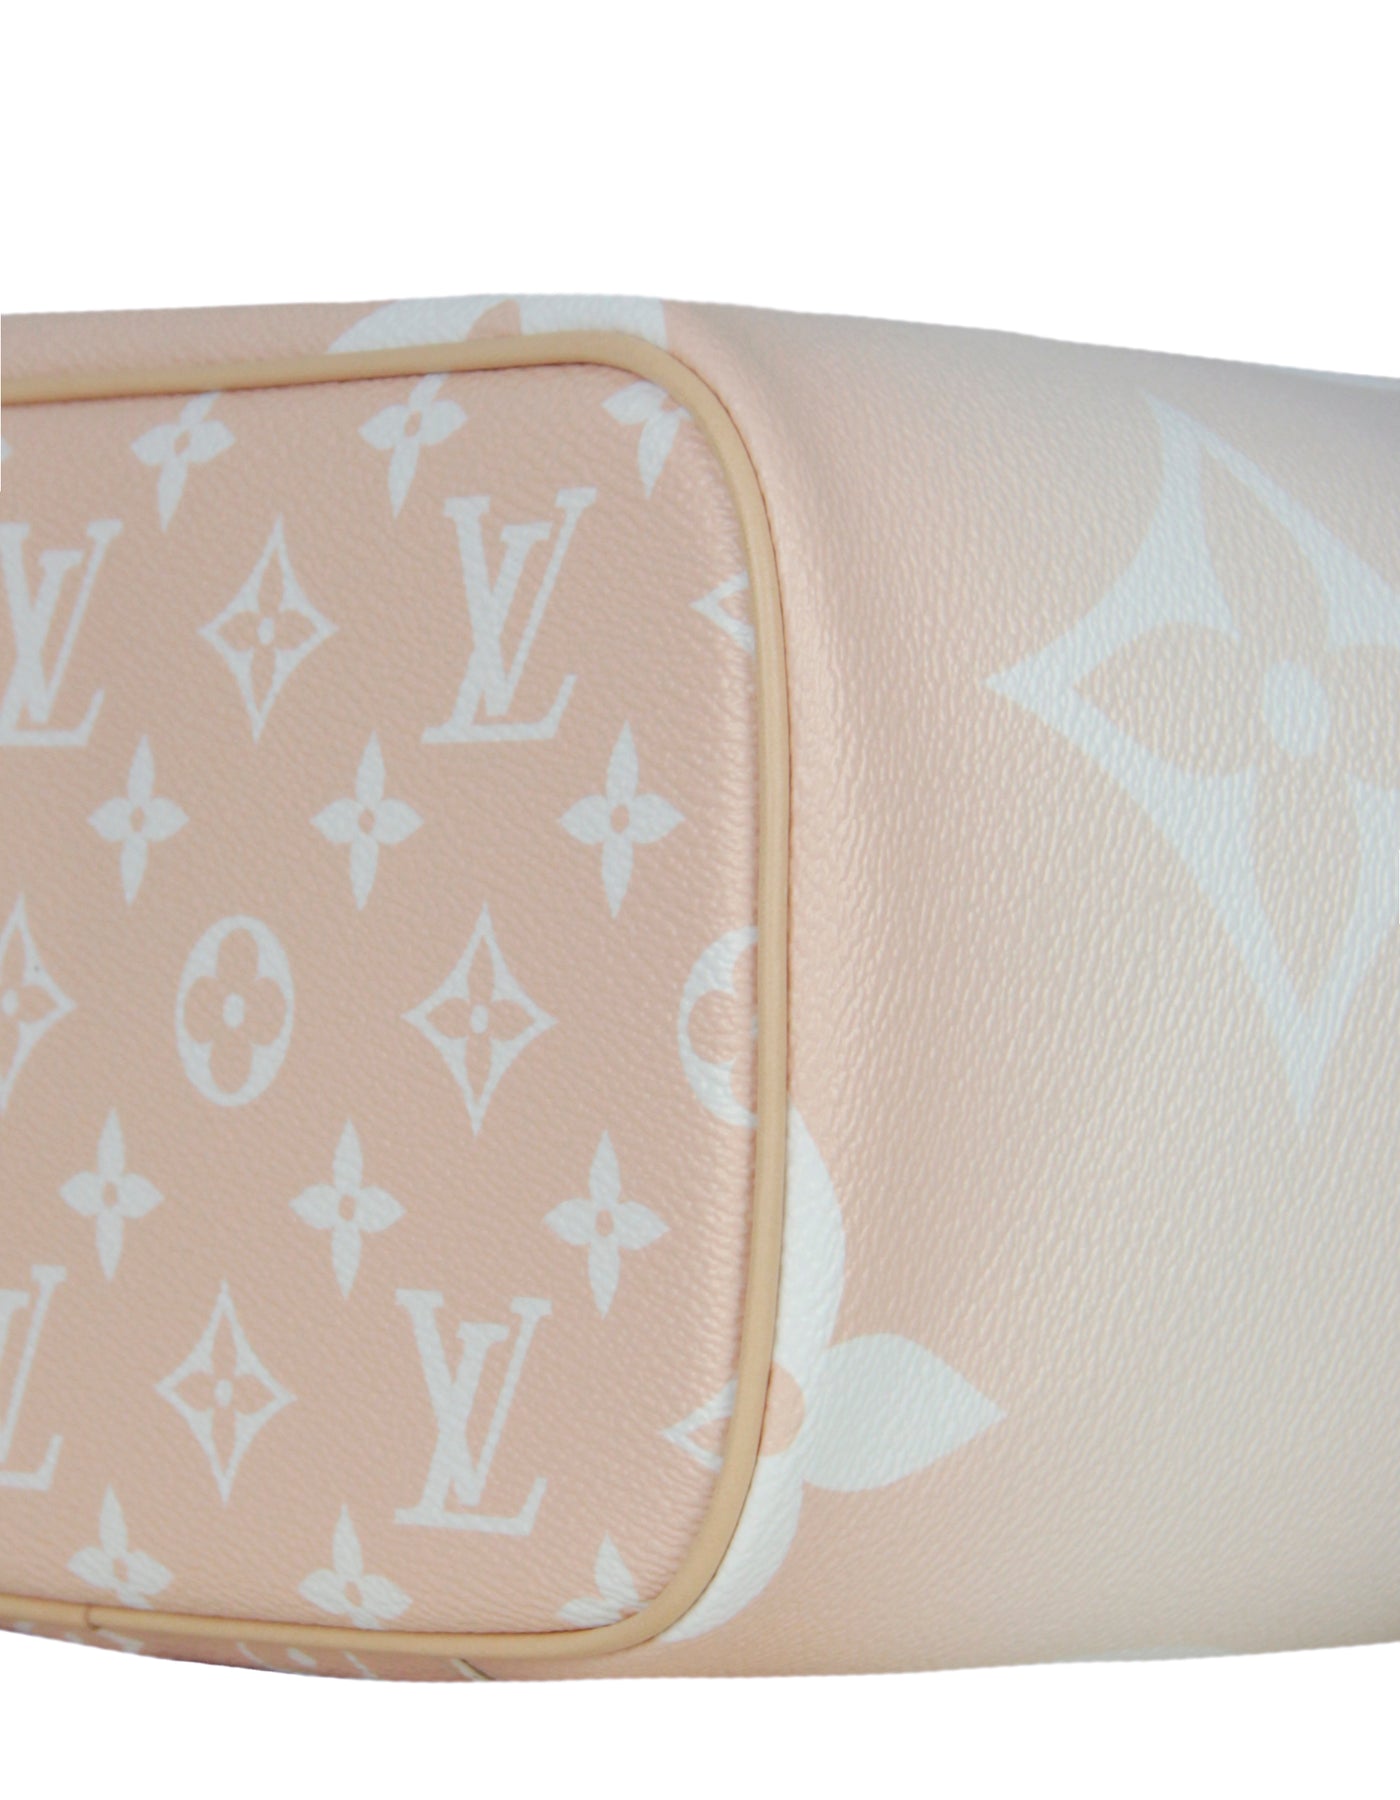 Louis Vuitton Nice Vanity Case By The Pool Monogram Giant BB at